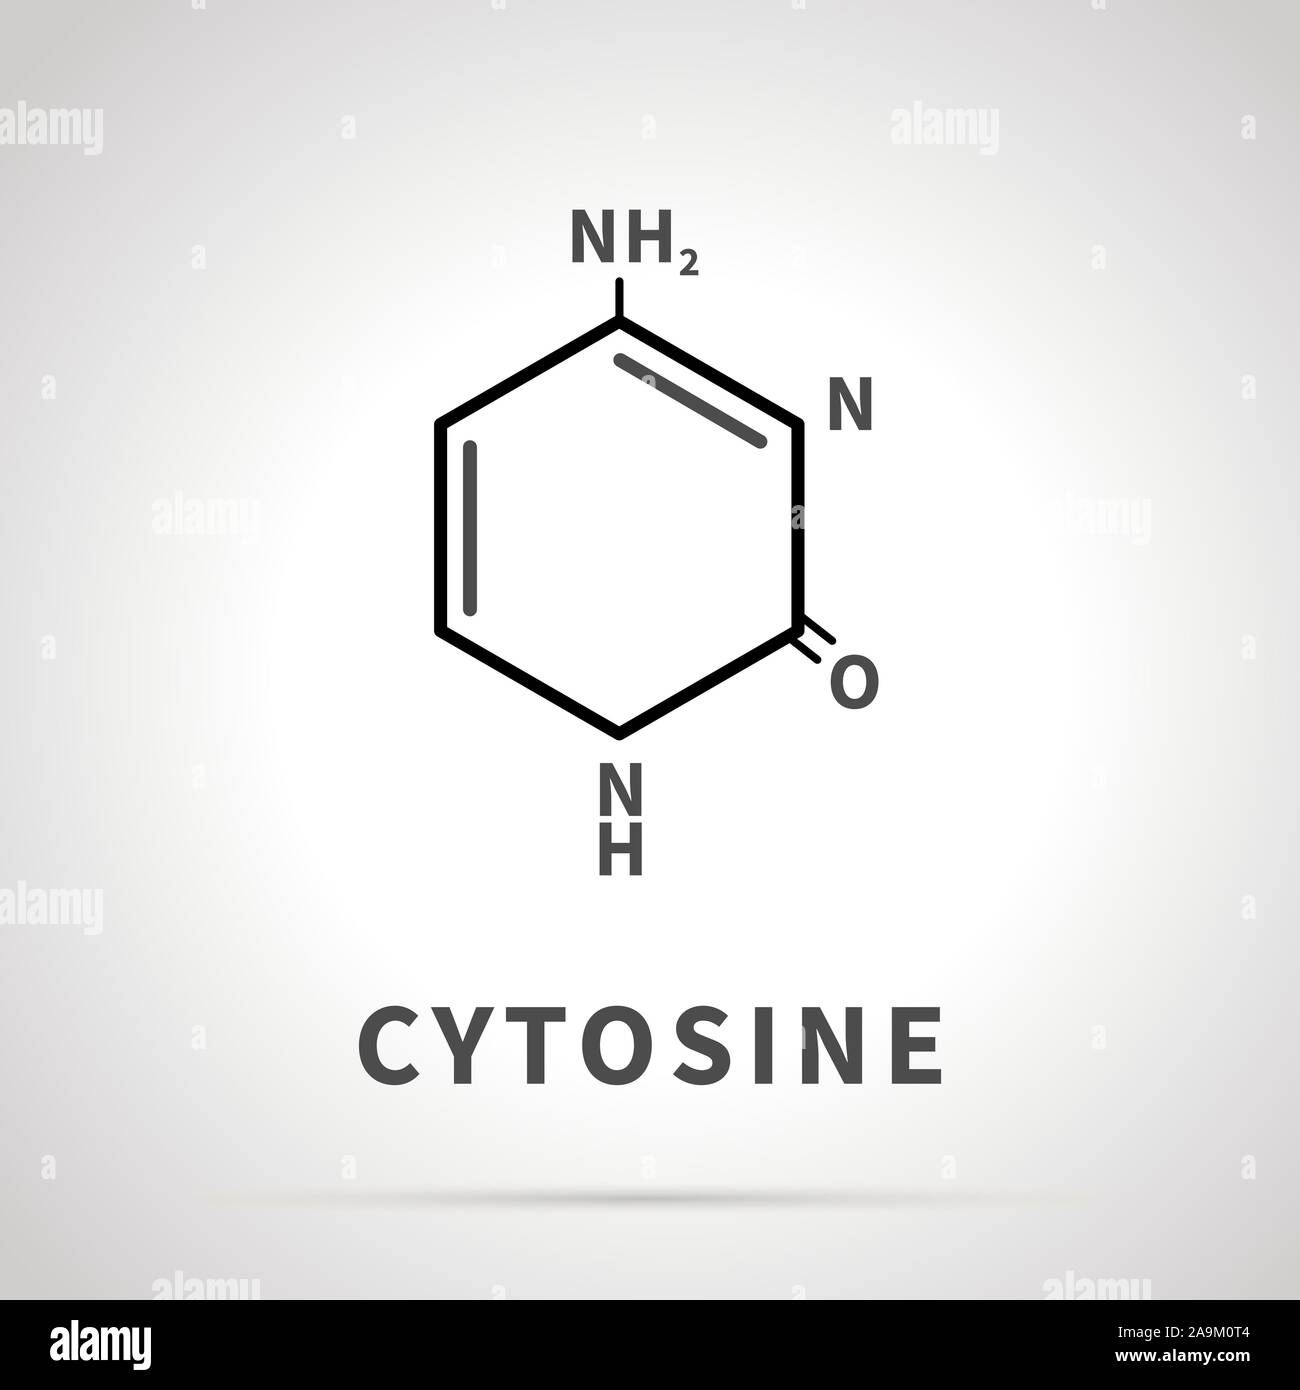 Chemical structure of Cytosine, one of the four main nucleobases, simple icon Stock Vector